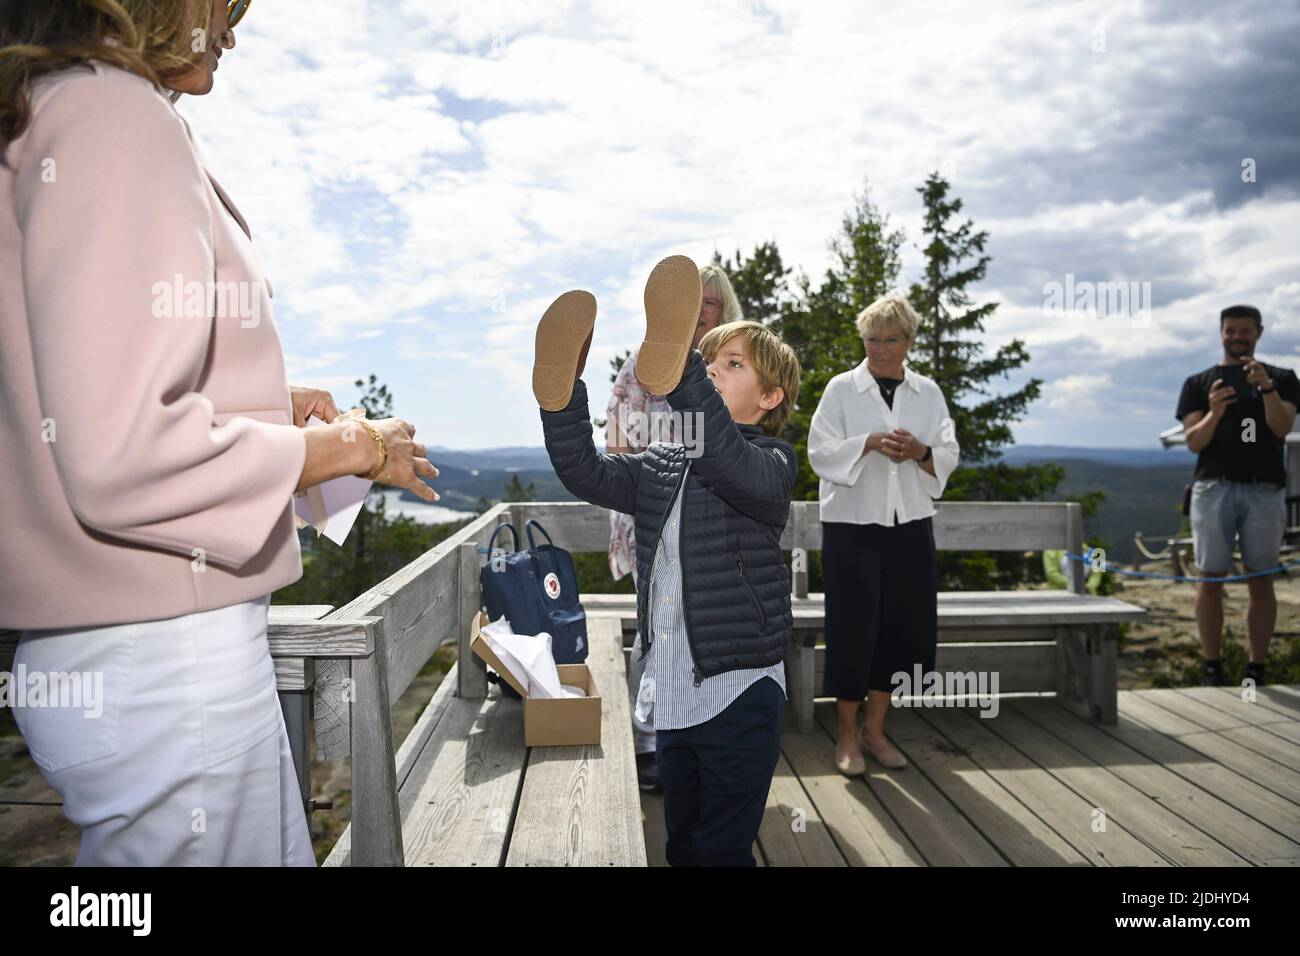 Skuleberget, Sweden, June 21, 2022, Prince Nicolas and Princess Madeleine with County Governor Berit Hogman (right) and Malin Svanholm (center), chairman of Kramfors municipal council, on the top of Skuleberget in Sweden, June 21, 2022. The Prince presented with a gift - a pair of shoes and a Fjällräven backpack. Photo: Patrick Trägårdh / TT / code 60190 Stock Photo